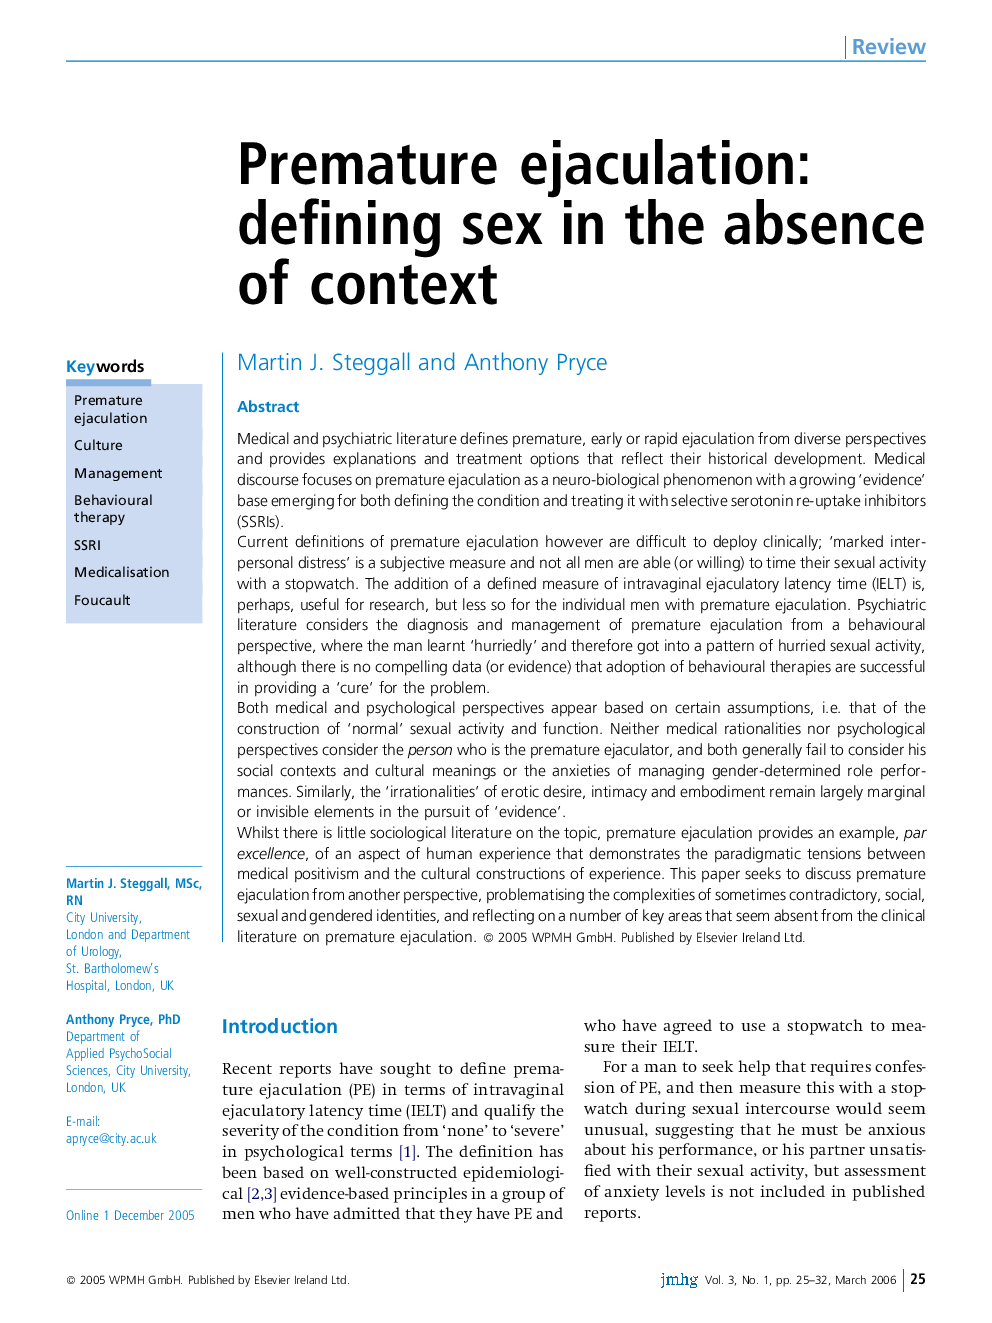 Premature ejaculation: defining sex in the absence of context